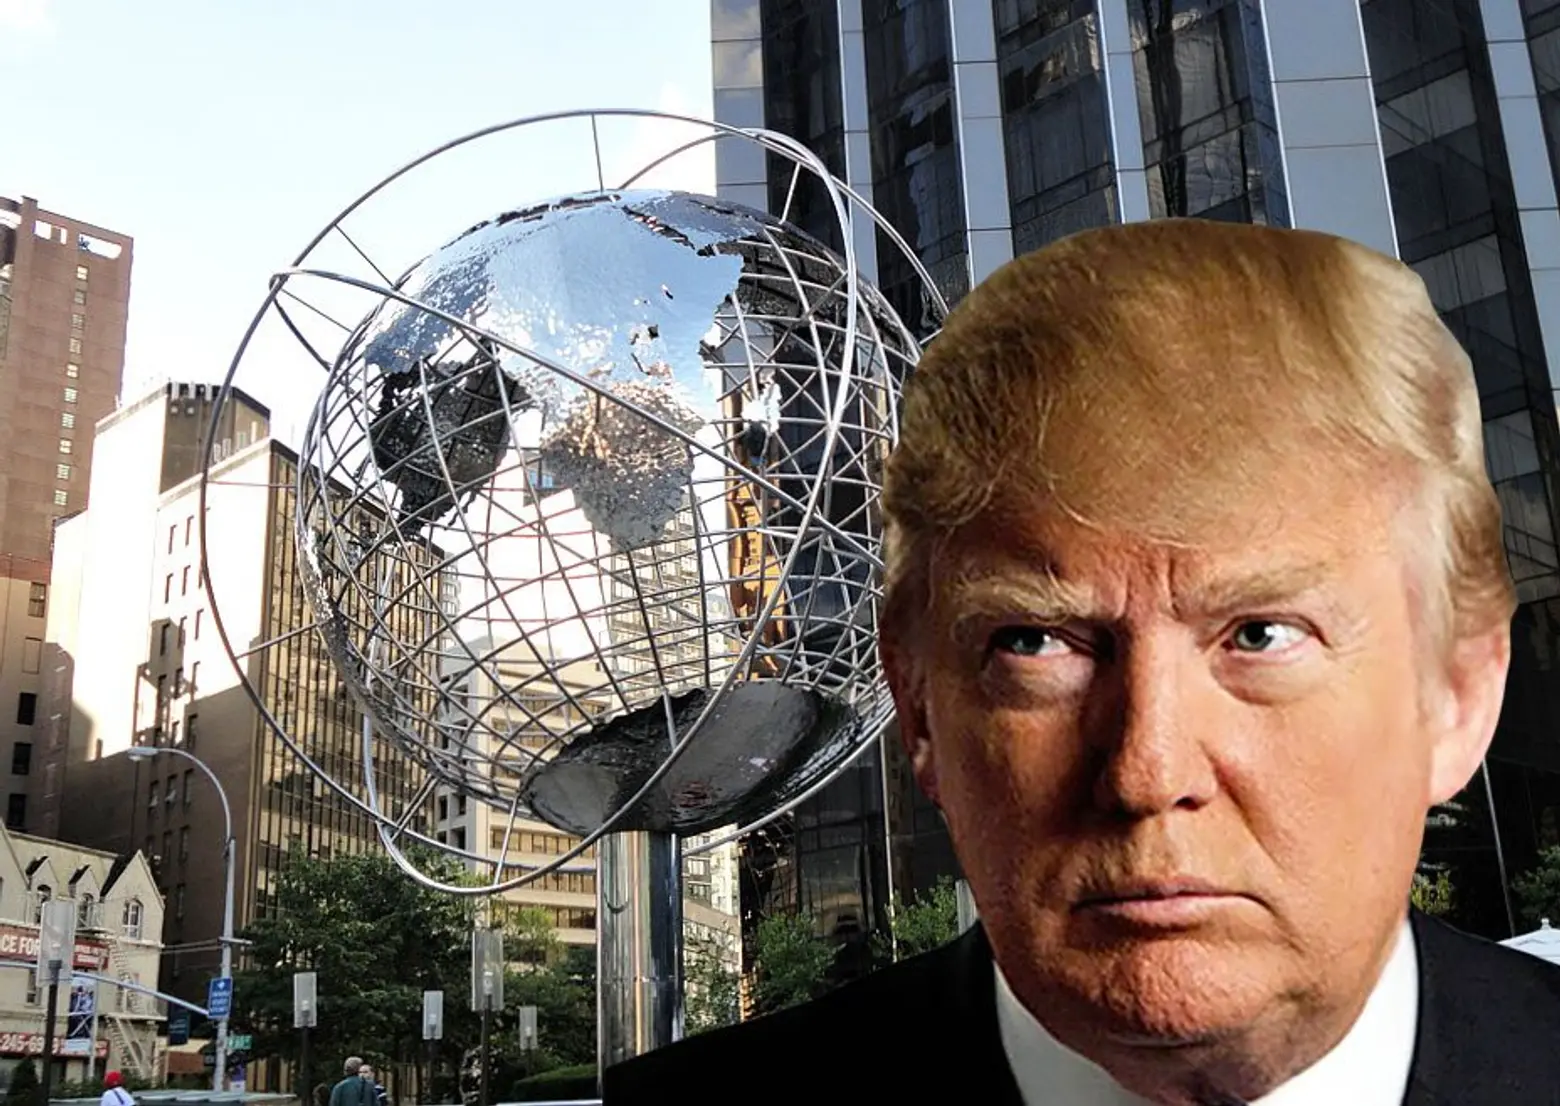 20 years ago, the city told Donald Trump he couldn’t put his name on the Columbus Circle globe